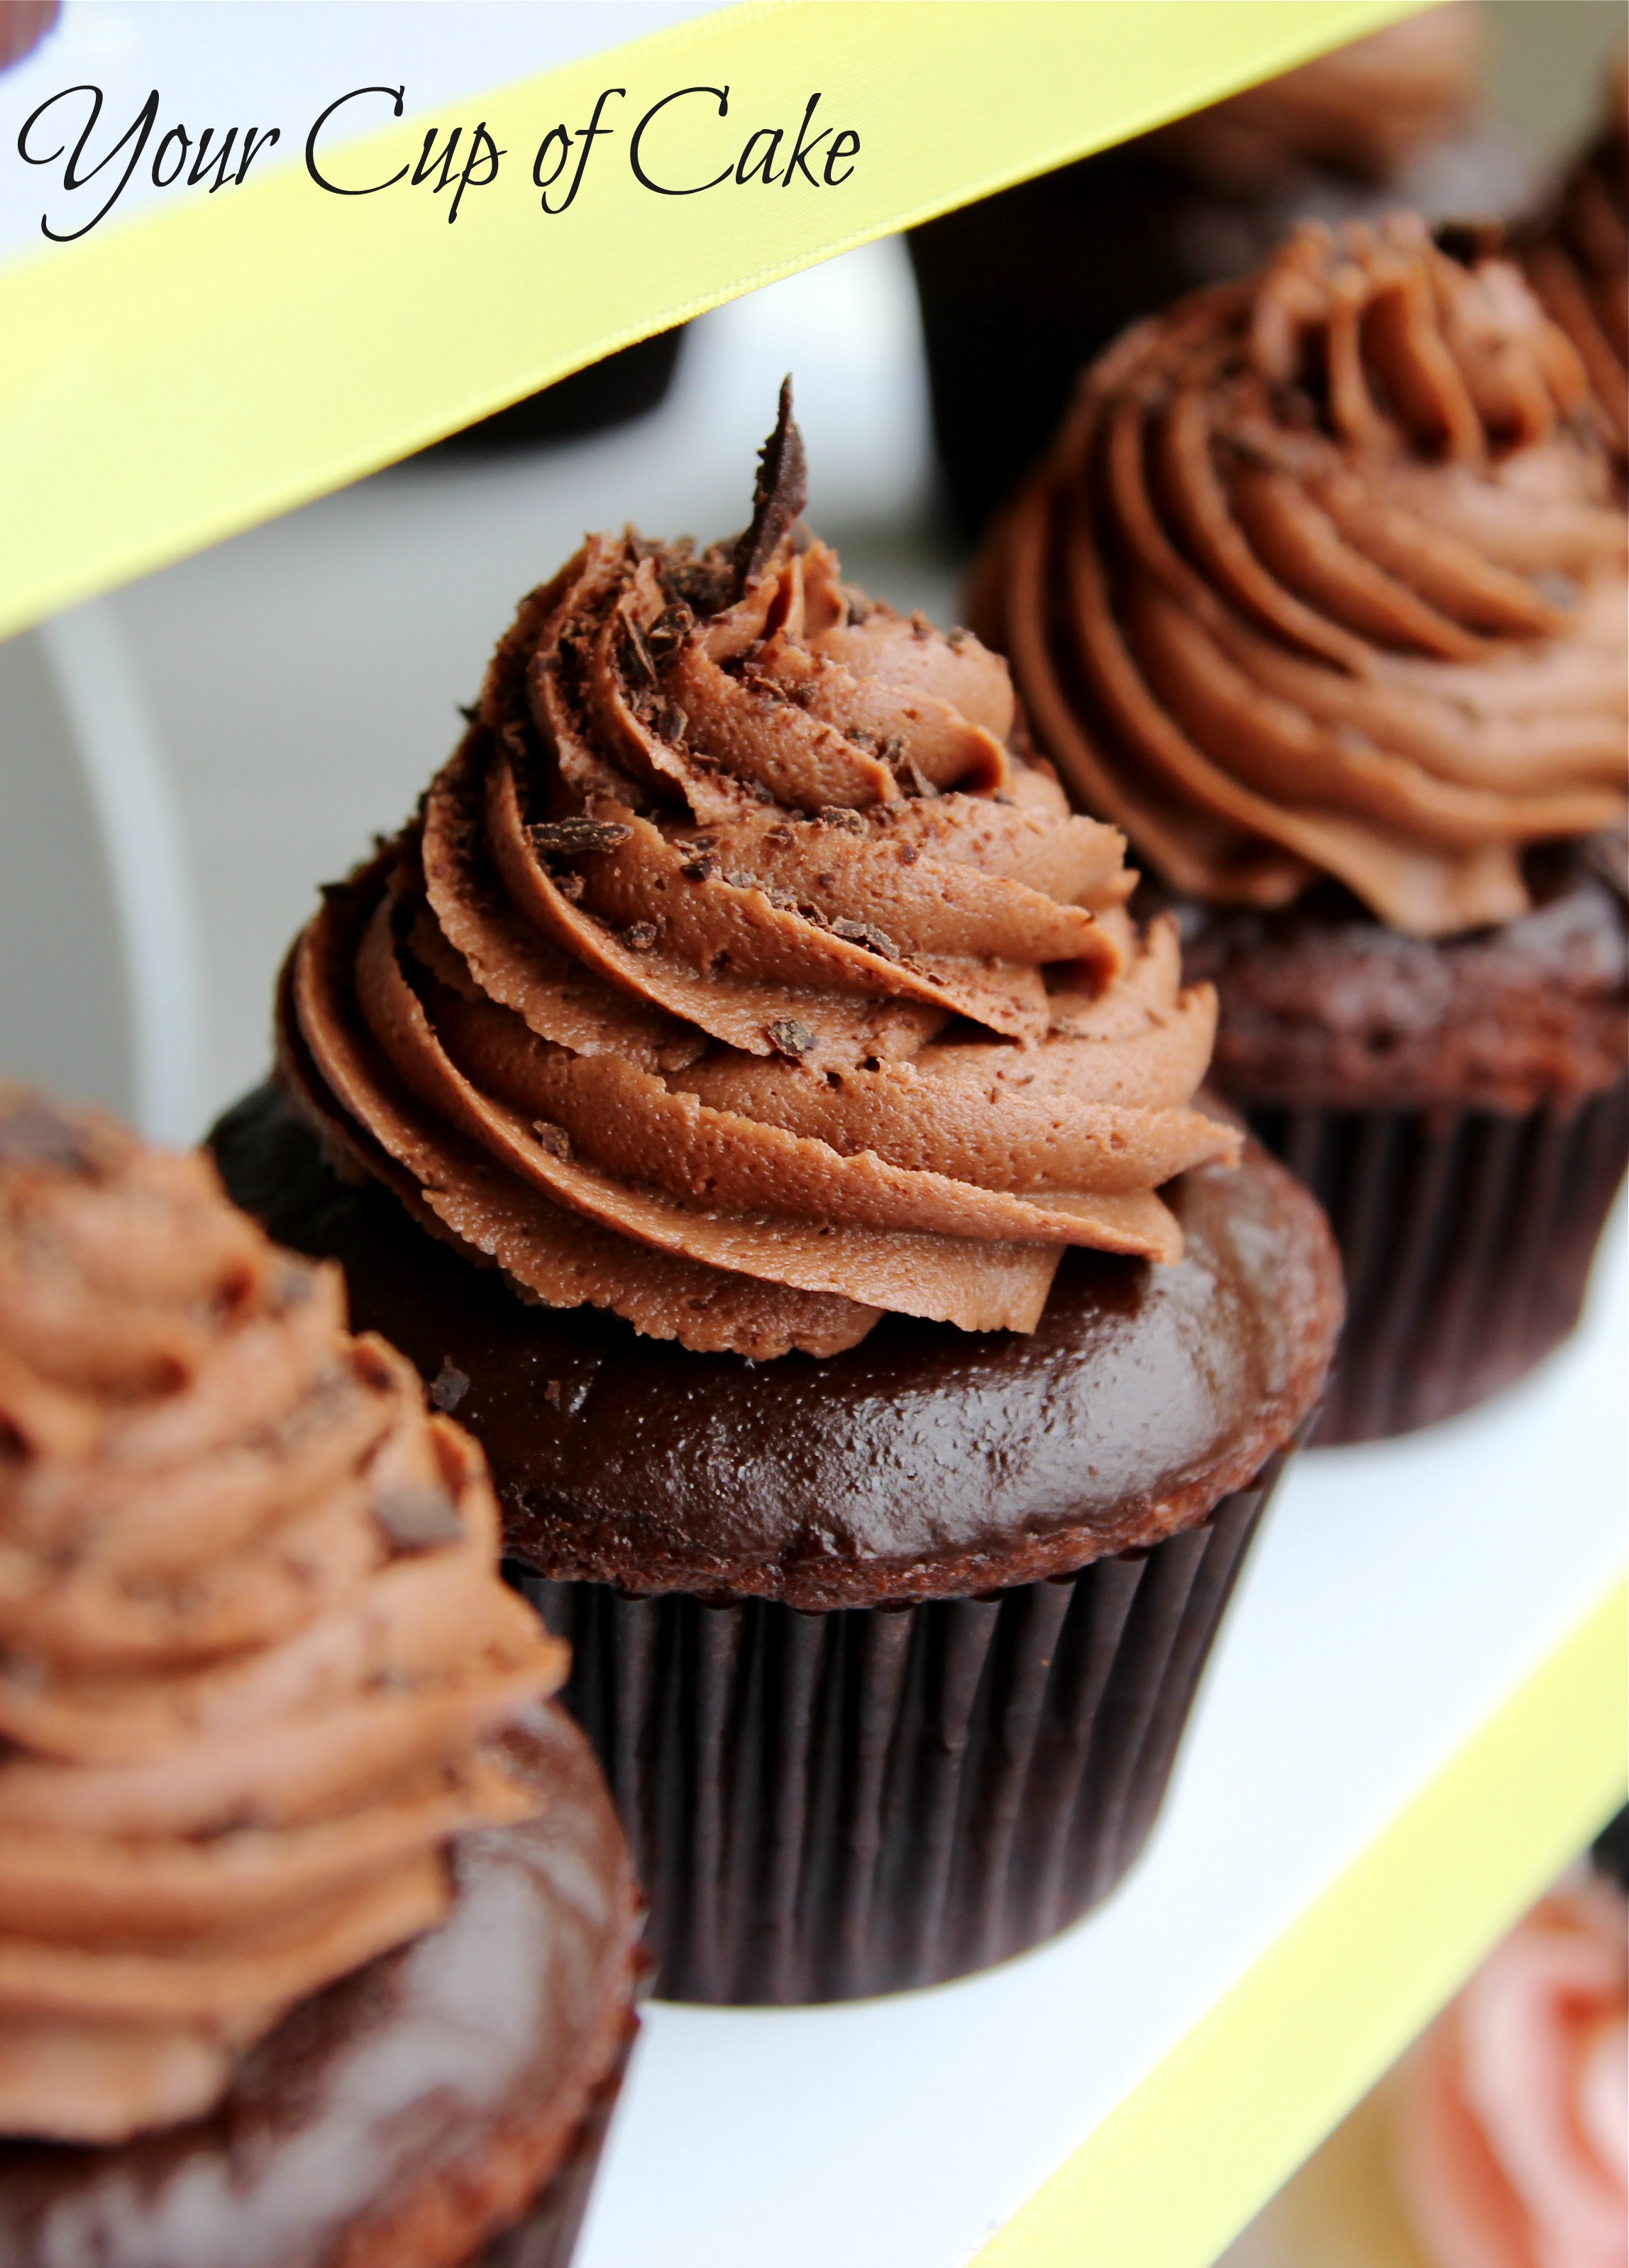 My Favorite Chocolate Cupcake - Your Cup of Cake